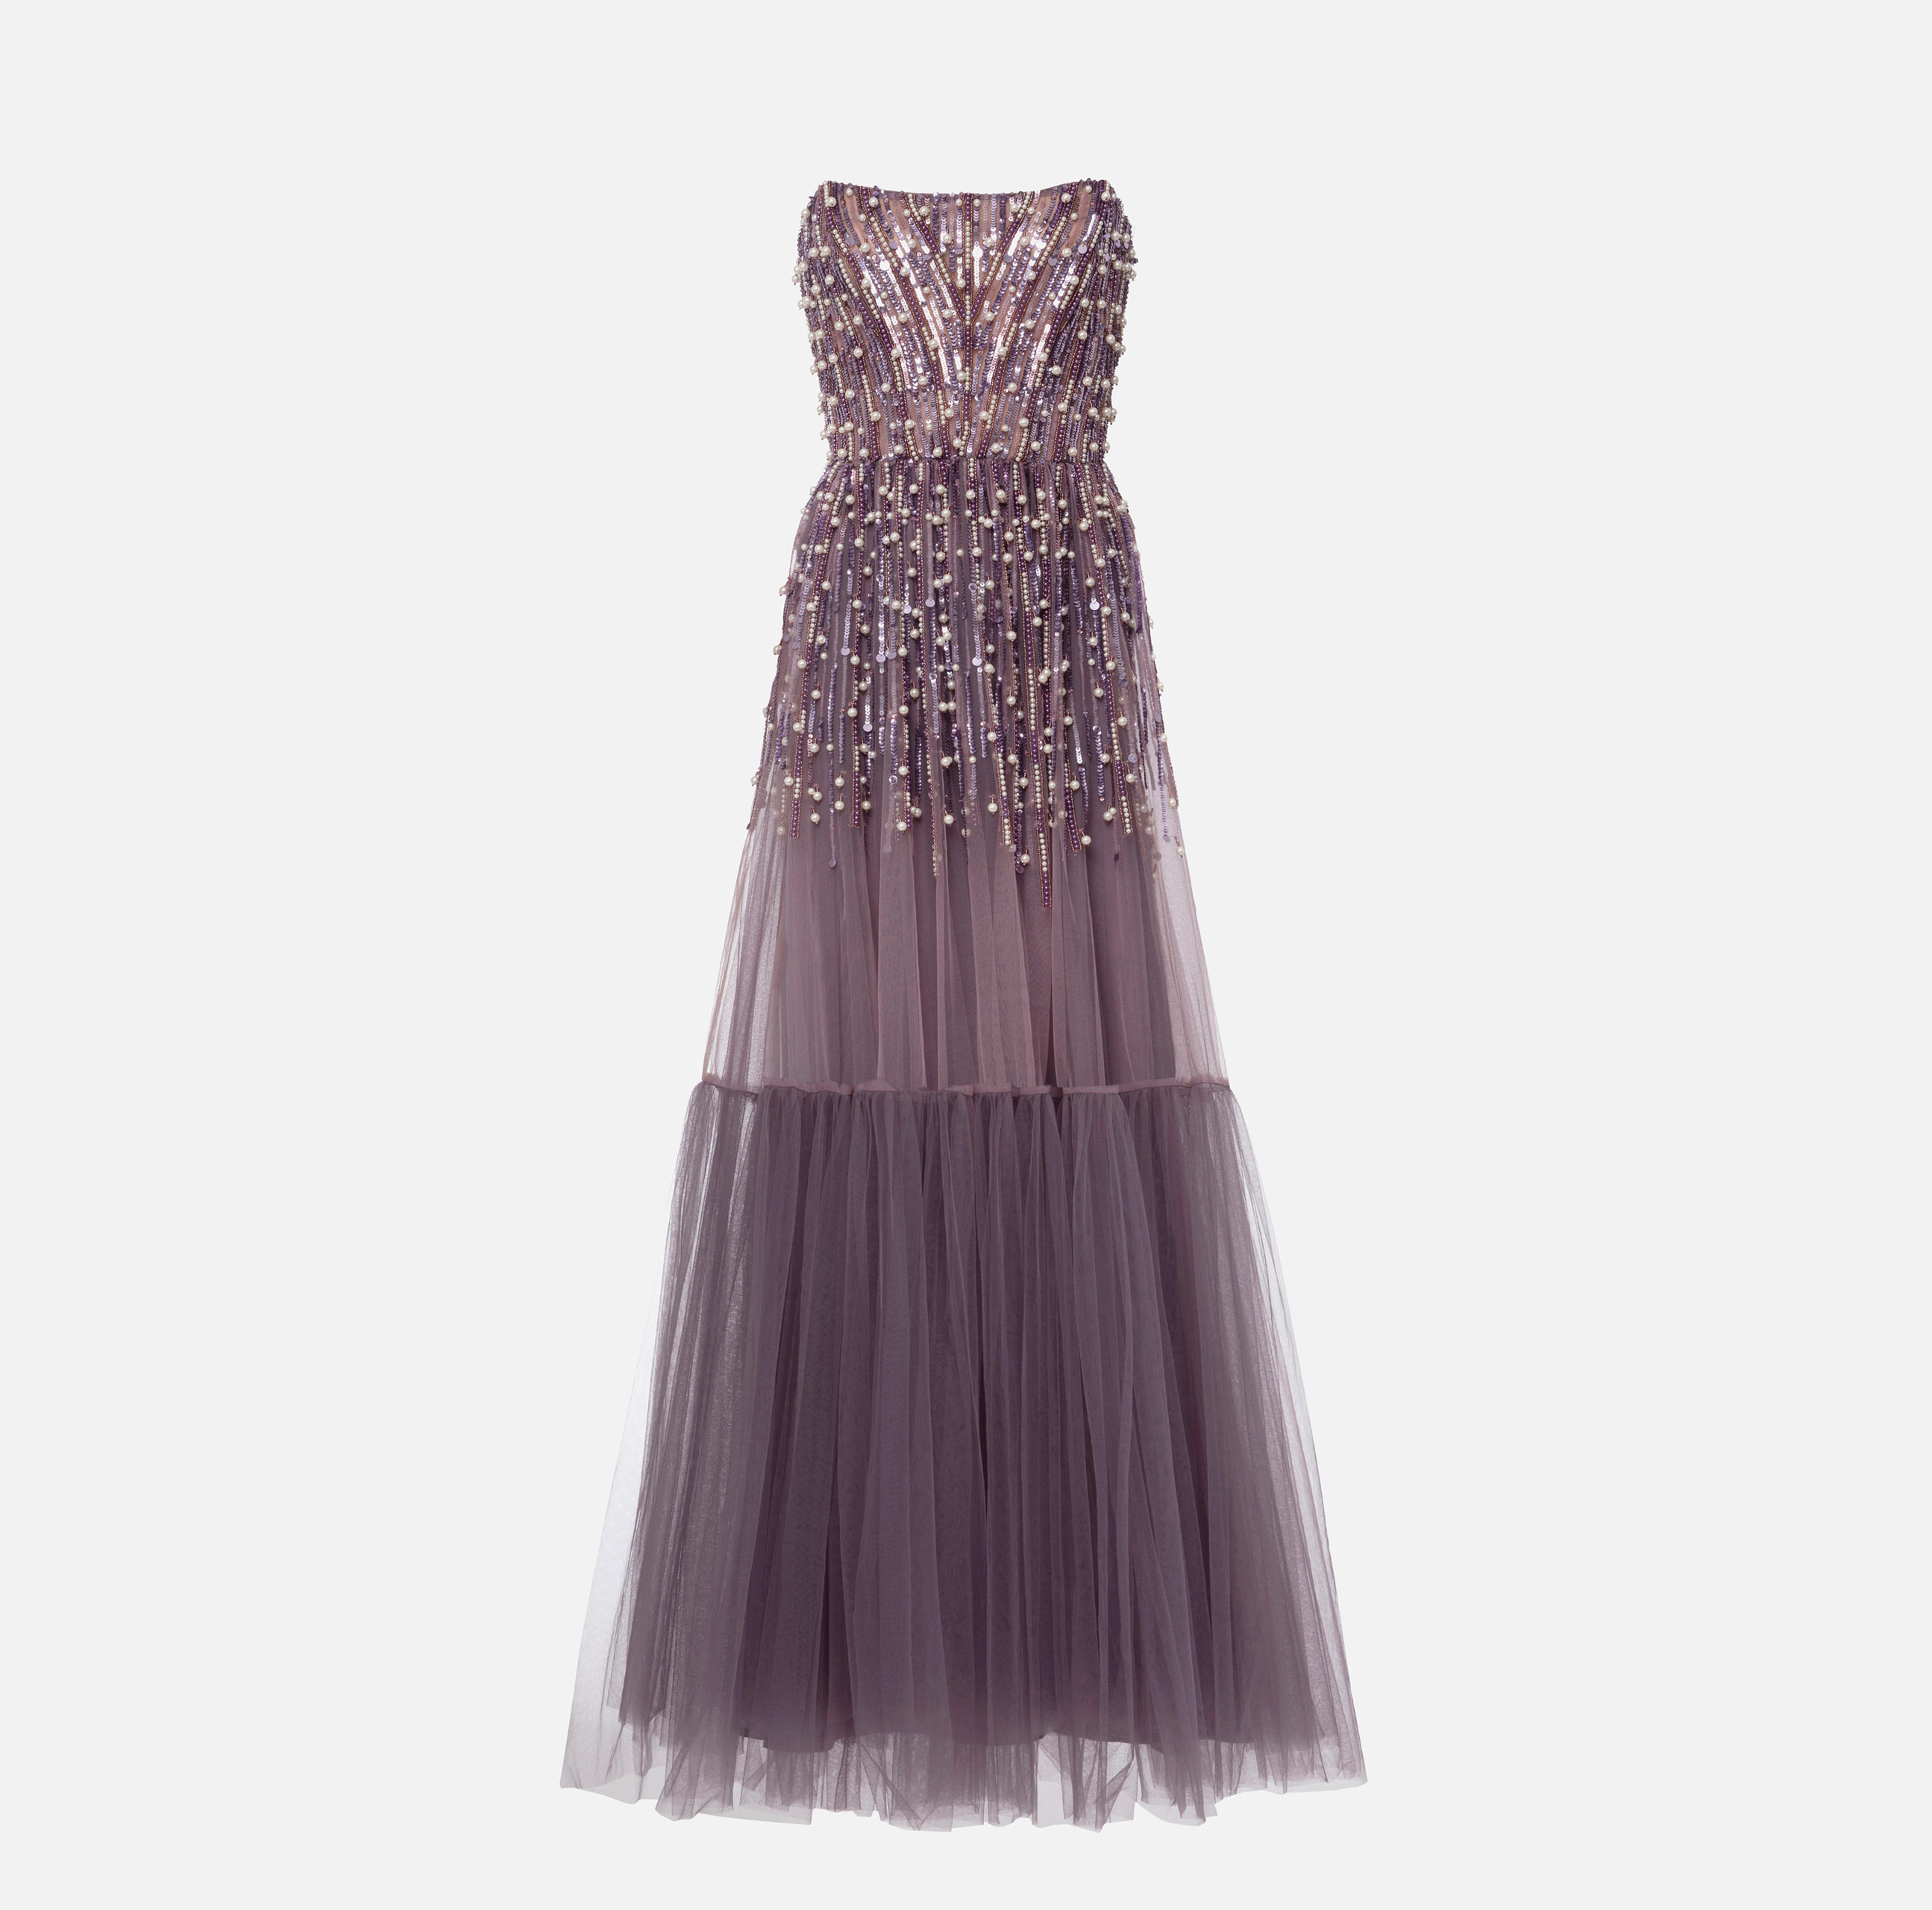 Red Carpet dress with sequins and pearls - ABBIGLIAMENTO - Elisabetta Franchi